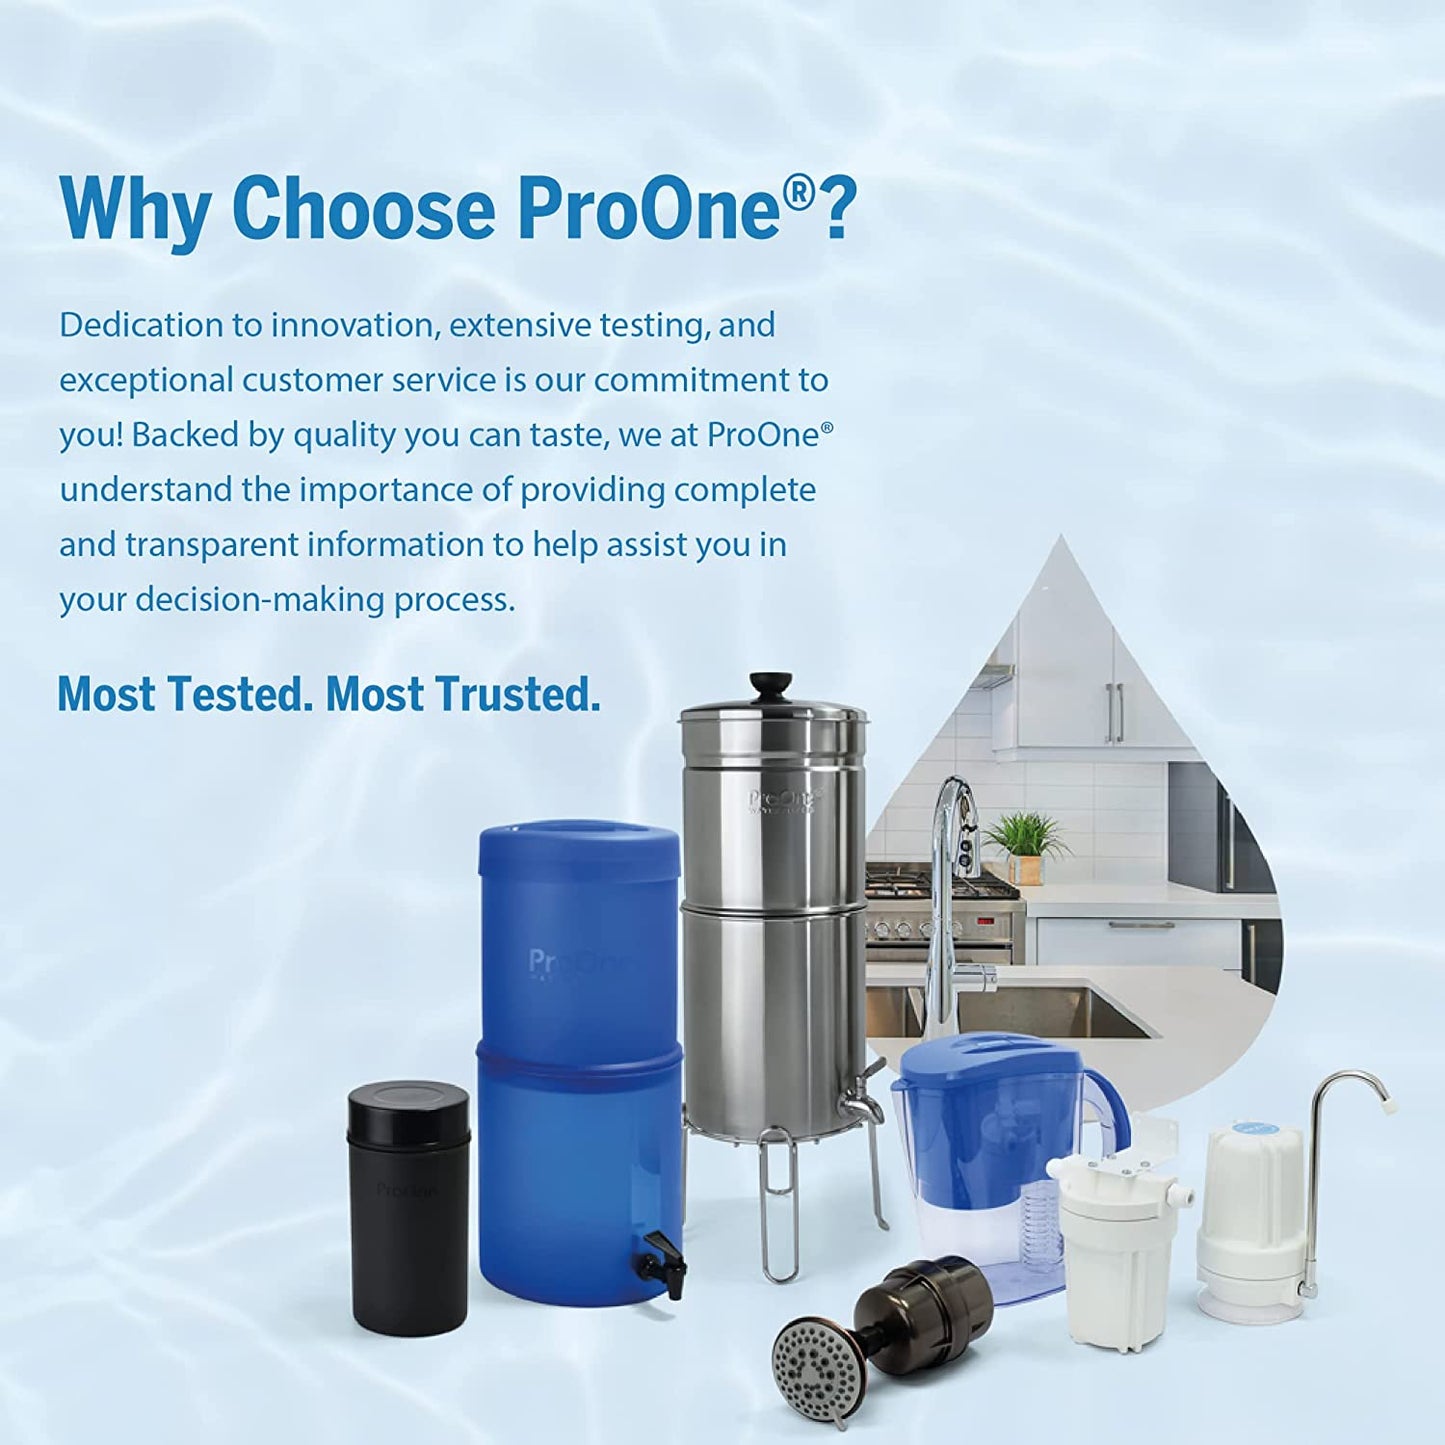 ProOne Traveler+ Stainless-Steel Gravity Water Filter System, 2.25-Gallon Water Capacity, Countertop Water Dispenser for Home, Camping, and Travel w/ (1) 5-inch Filter & Wire Stand